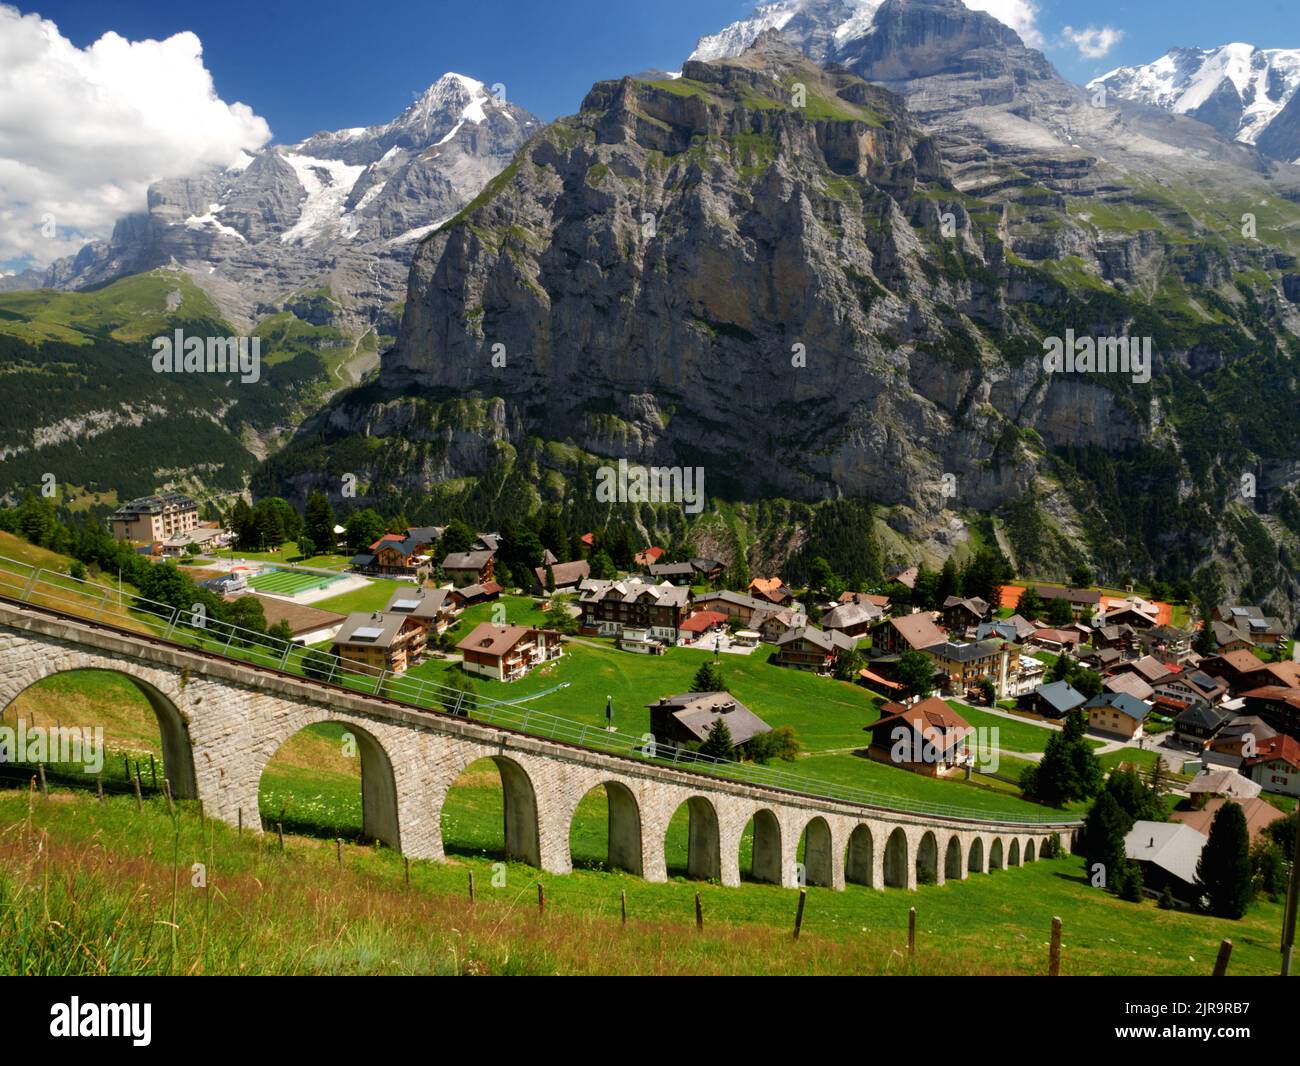 The Allmendhubel funicular seen from the panorama path overlooking the village of Murren, Bernese Oberland, Switzerland. Stock Photo